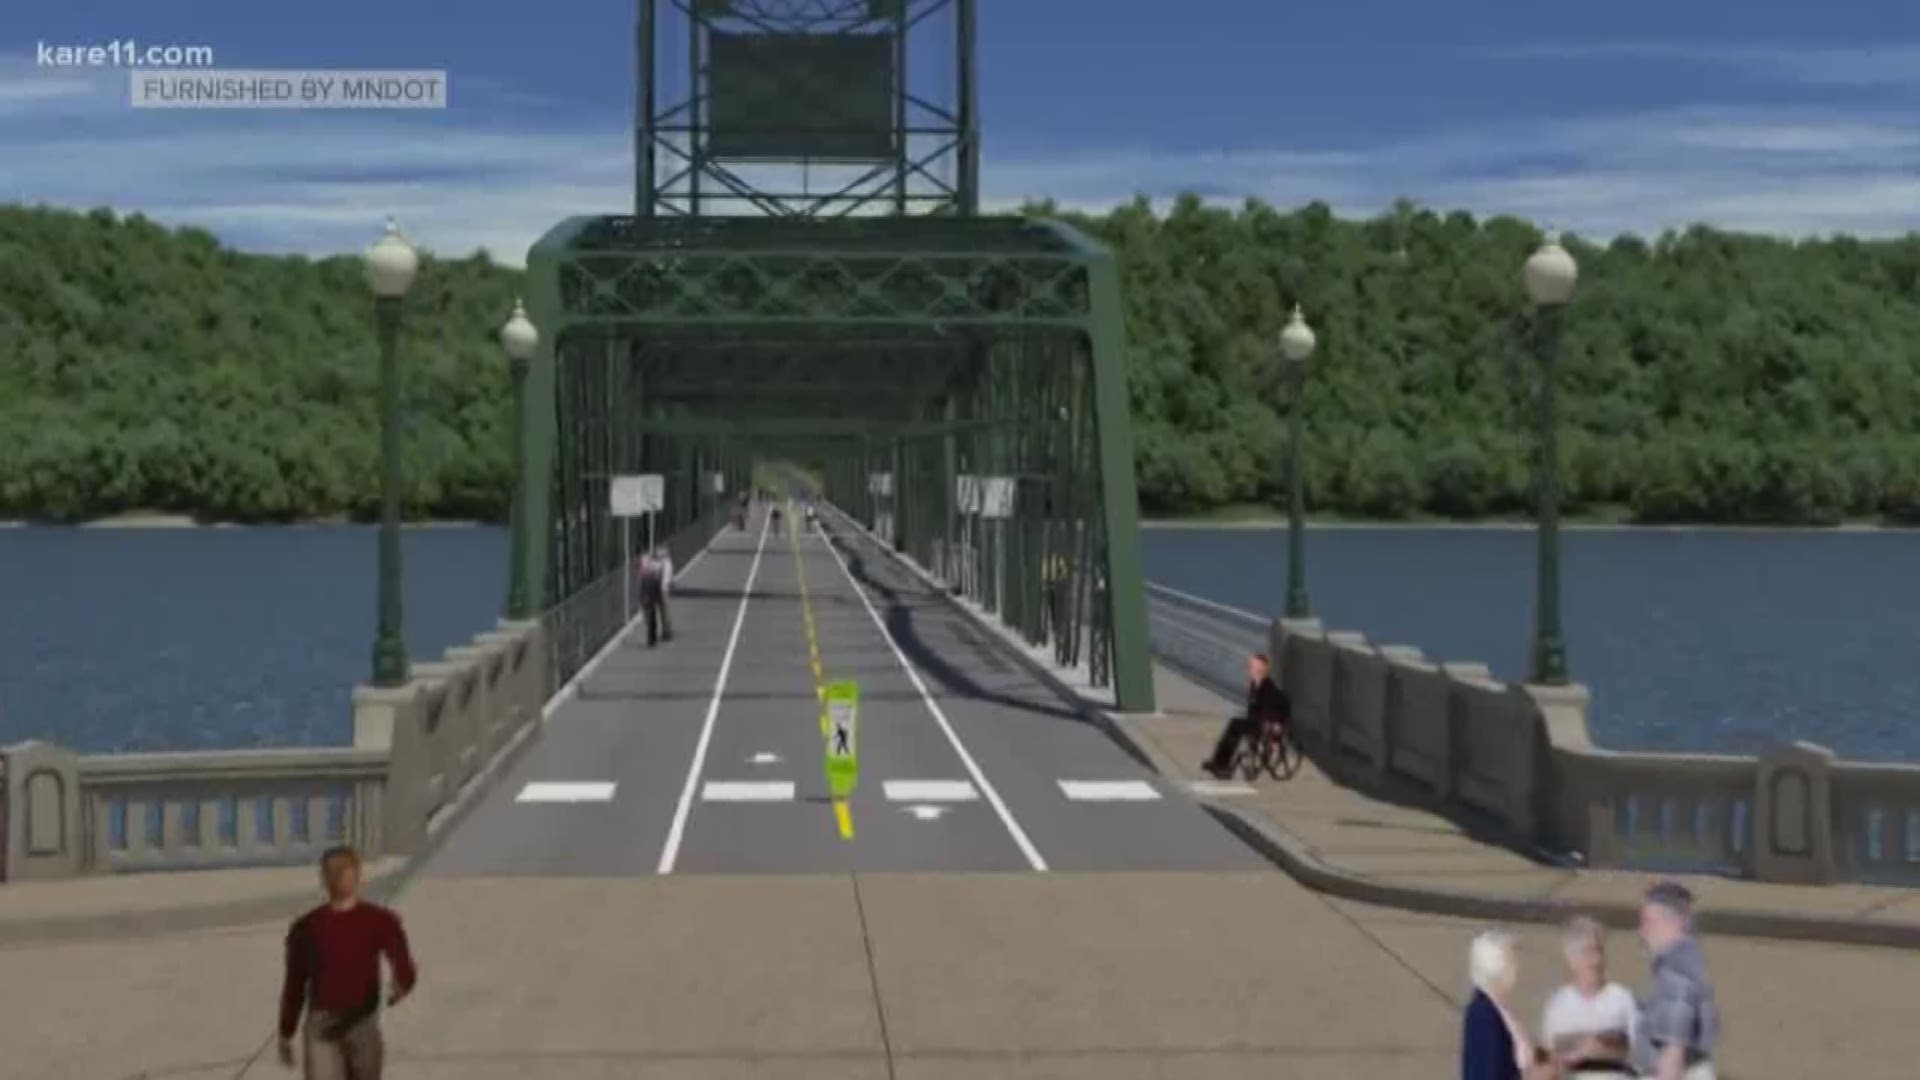 The high water in Stillwater is delaying a project that will likely be popular with walkers and bike riders. It's the St. Croix River Crossing Loop Trail and it will incorporate Stillwater's historic lift bridge.